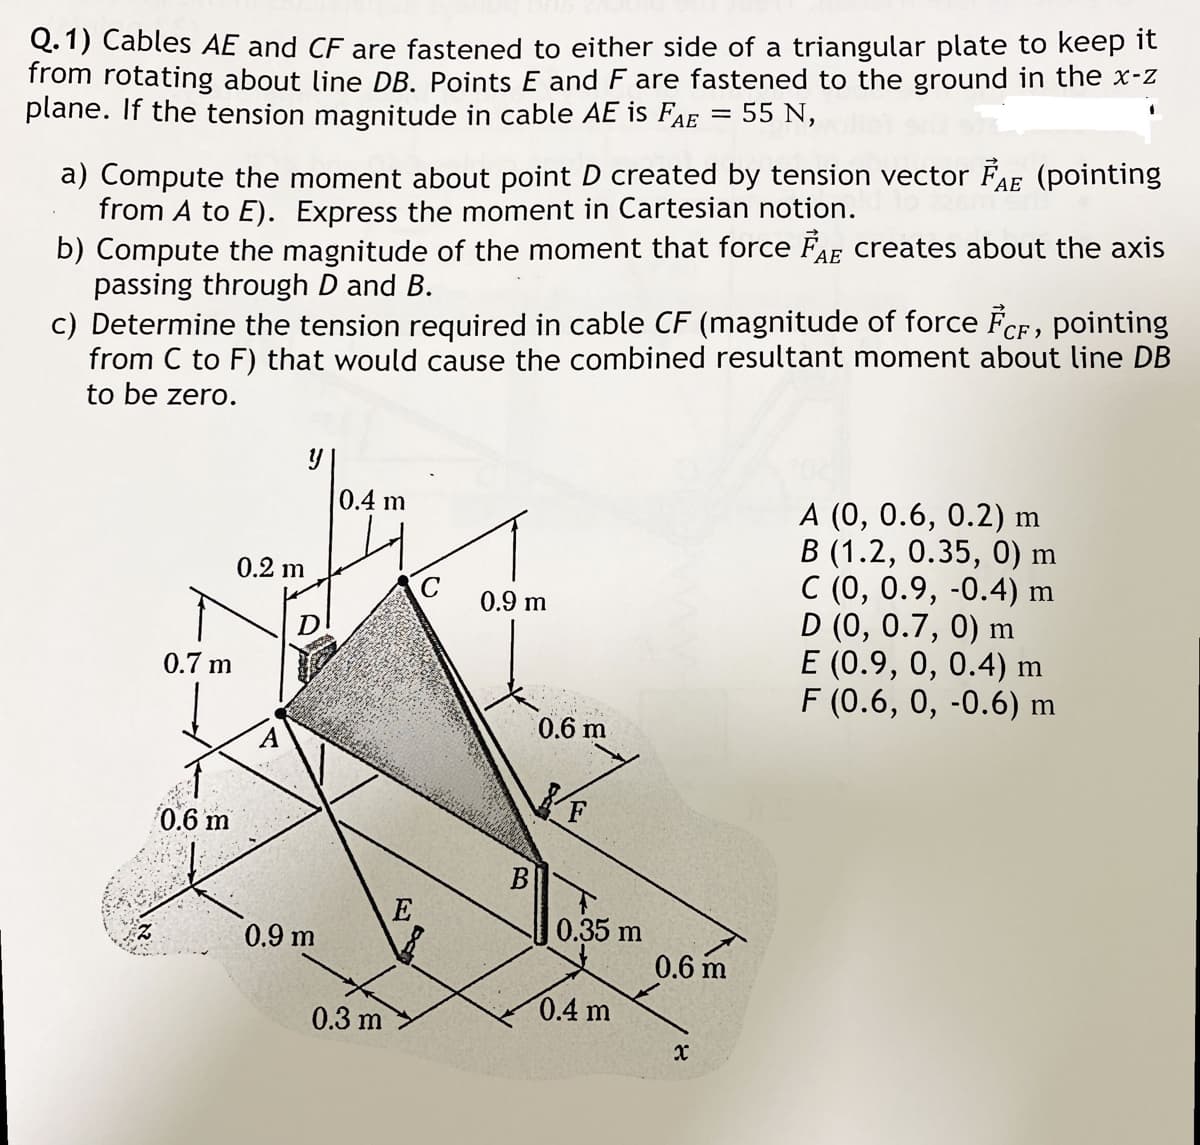 Q.1) Cables AE and CF are fastened to either side of a triangular plate to keep it
from rotating about line DB. Points E and F are fastened to the ground in the x-z
plane. If the tension magnitude in cable AE is FAE = 55 N,
a) Compute the moment about point D created by tension vector FAE (pointing
from A to E). Express the moment in Cartesian notion.
b) Compute the magnitude of the moment that force FAE creates about the axis
passing through D and B.
c) Determine the tension required in cable CF (magnitude of force FCF, pointing
from C to F) that would cause the combined resultant moment about line DB
to be zero.
0.7 m
0.6 m
y
0.2 m
0.9 m
0.4 m
0.3 m
E
C
0.9 m
B
0.6 m
F
0.35 m
0.4 m
0.6 m
x
A (0, 0.6, 0.2) m
B (1.2, 0.35, 0) m
C (0, 0.9, -0.4) m
D (0, 0.7, 0) m
E (0.9, 0, 0.4) m
F (0.6, 0, -0.6) m